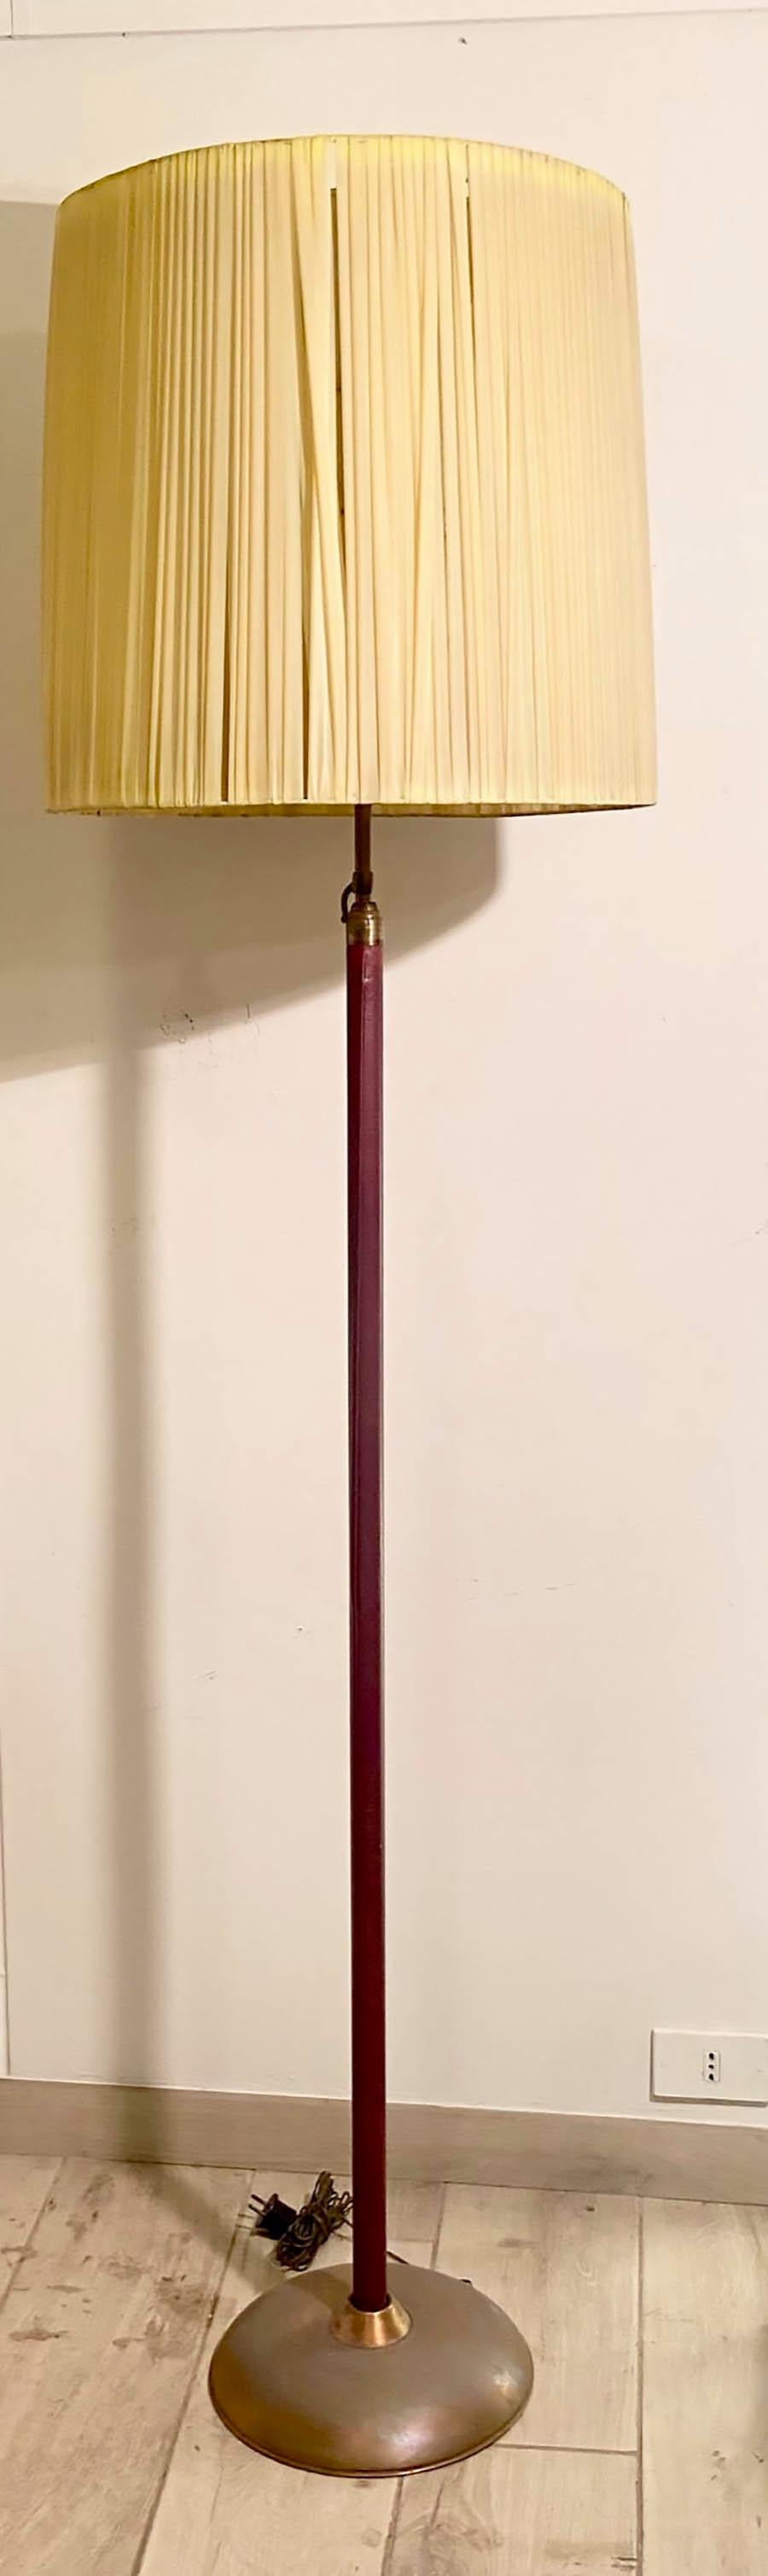 Height-adjustable floor lamp, made of brass in the style of Angelo Lelli in his productions for Arredoluce.
The raffia lampshade is not the original one, it has a maximum diameter of 50 cm.
The stem of the lamp is covered in burgundy imitation